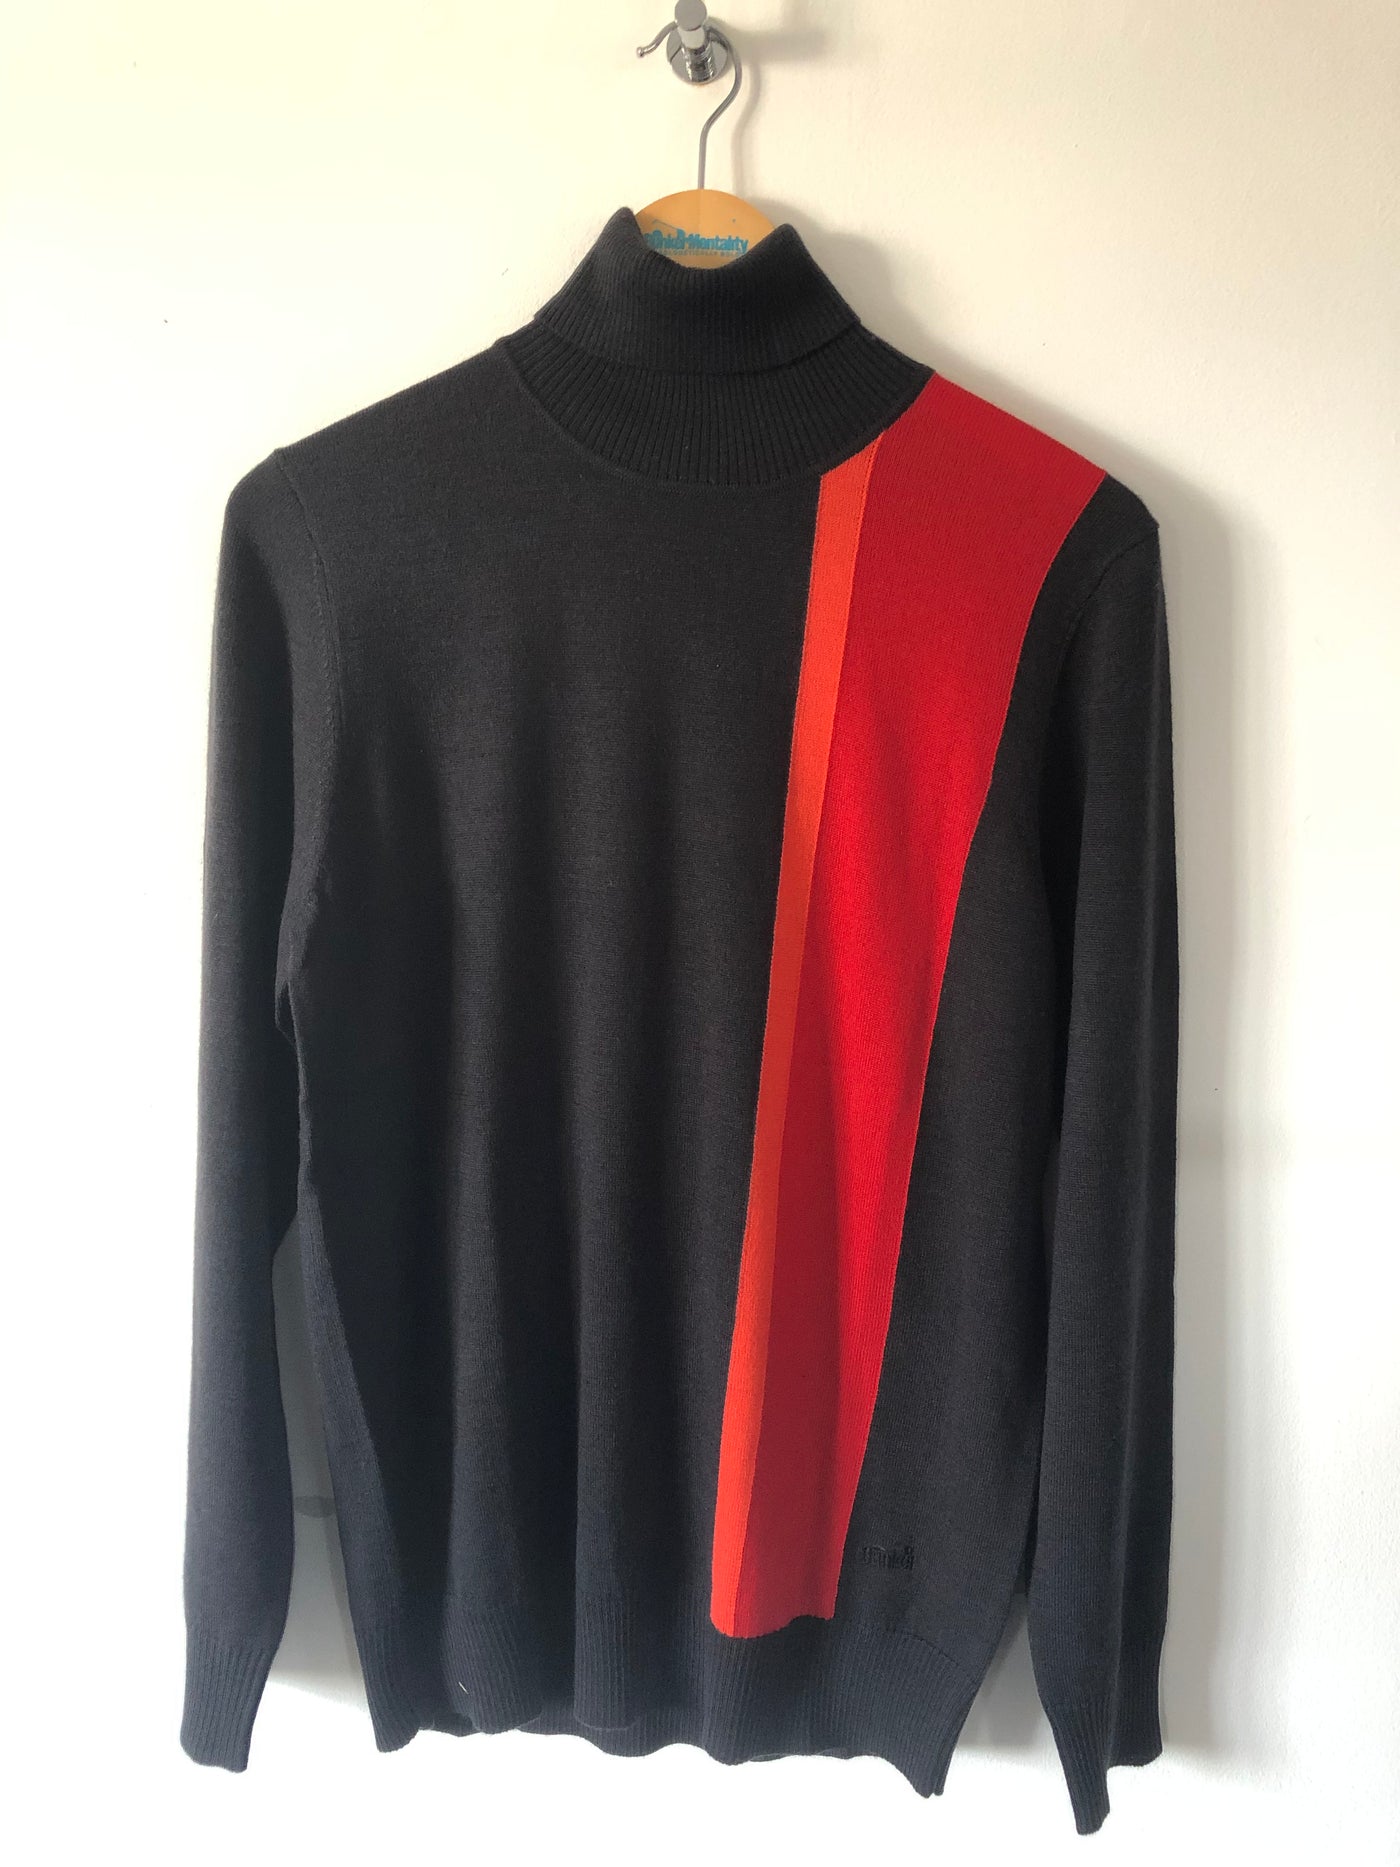 Merino Wool Roll Neck Jumper (Sample) - Charcoal Grey with Red Stripe  - Multiple Sizes